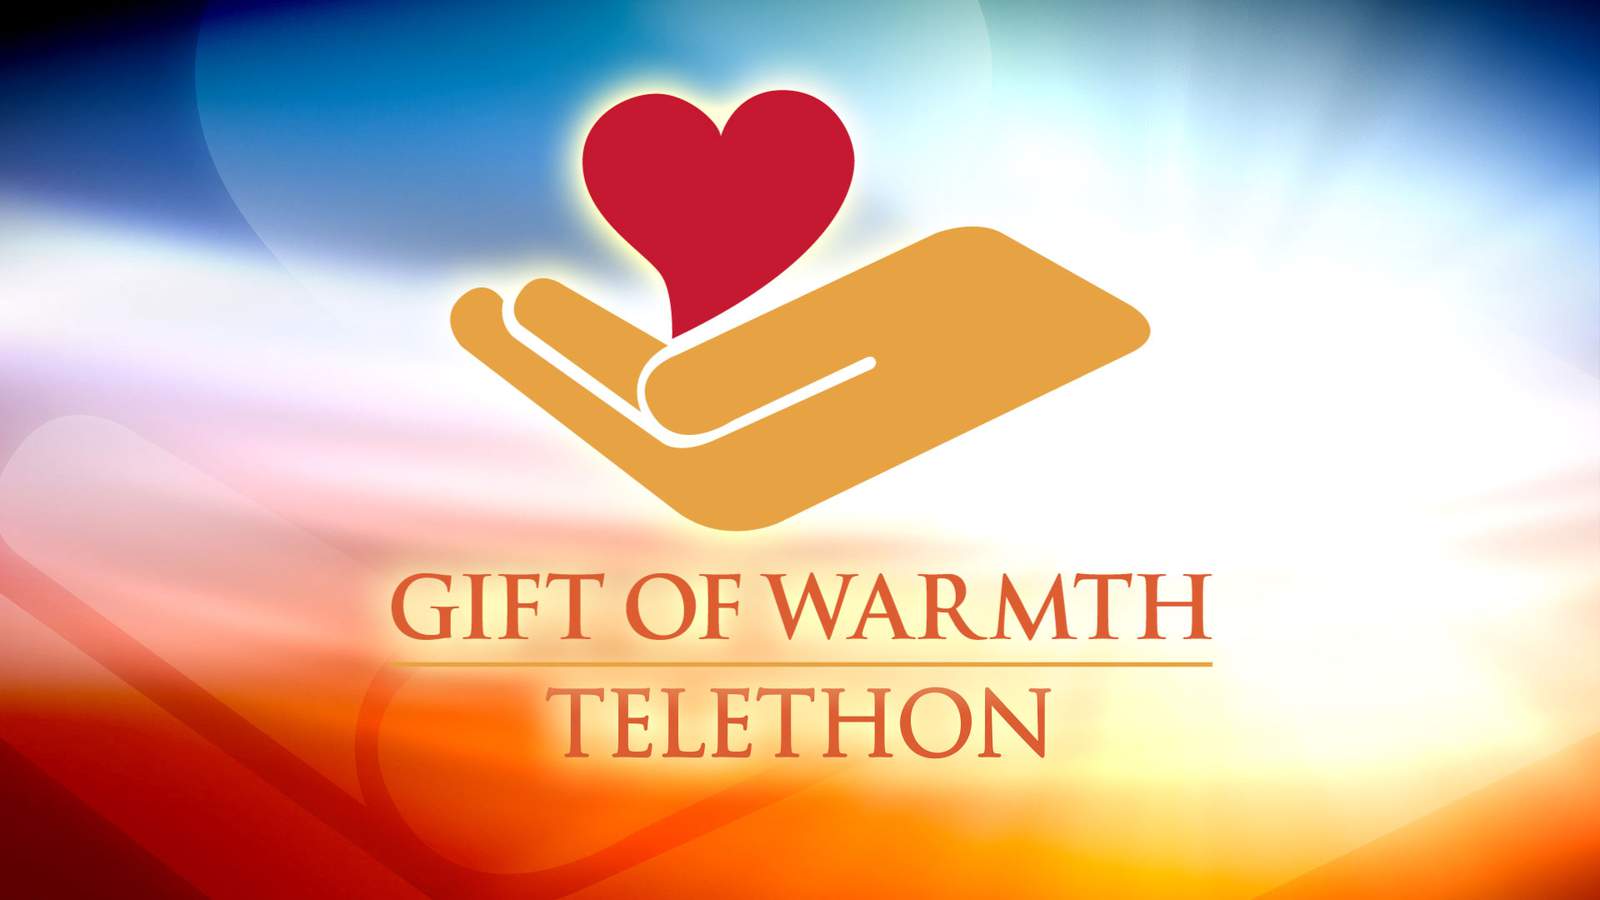 Gift of Warmth telethon: You can donate to help families in need